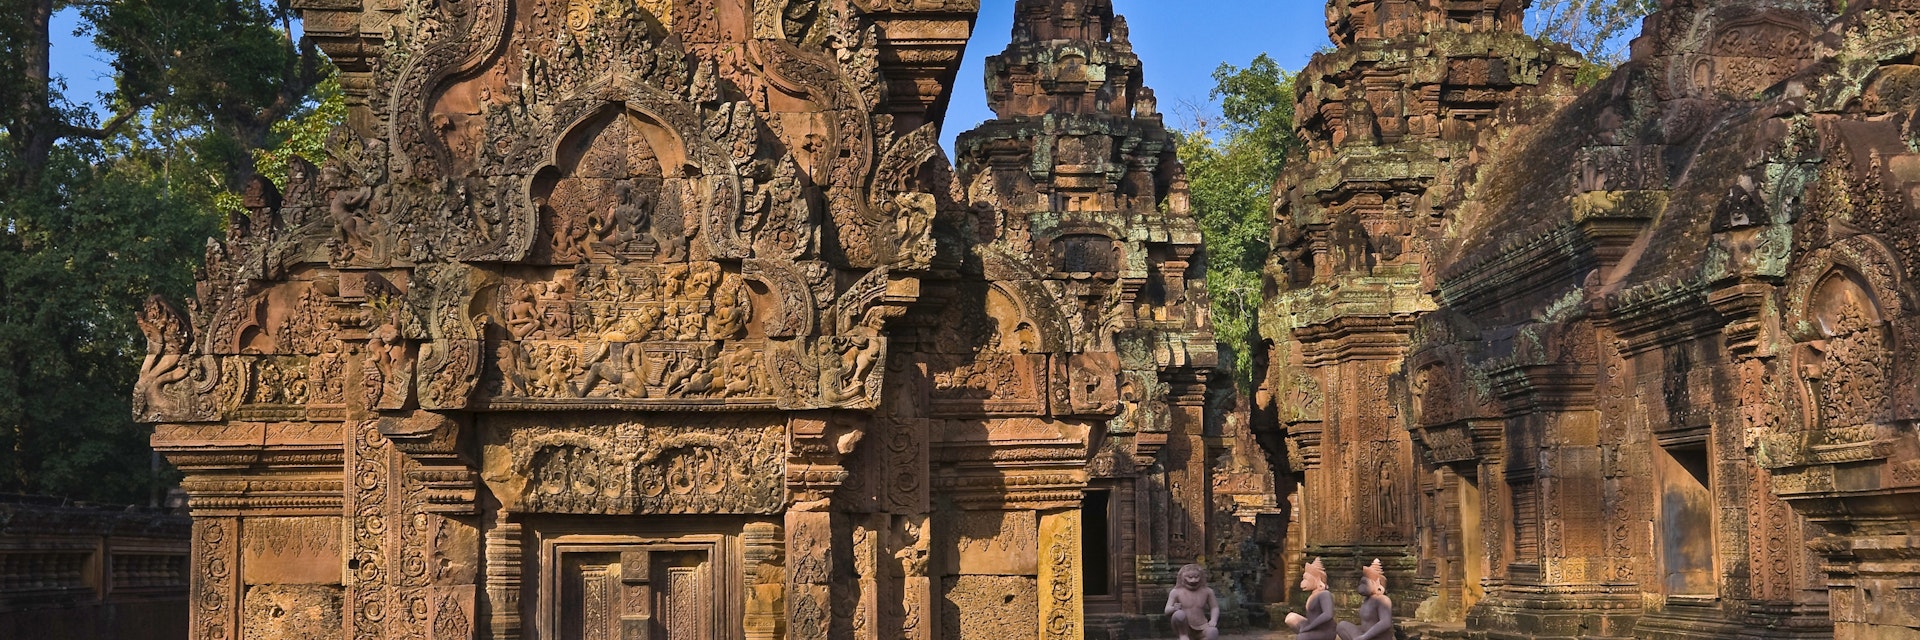 Cambodia, Siem Reap Province, Angkor site, Banteay Srei temple 10th century